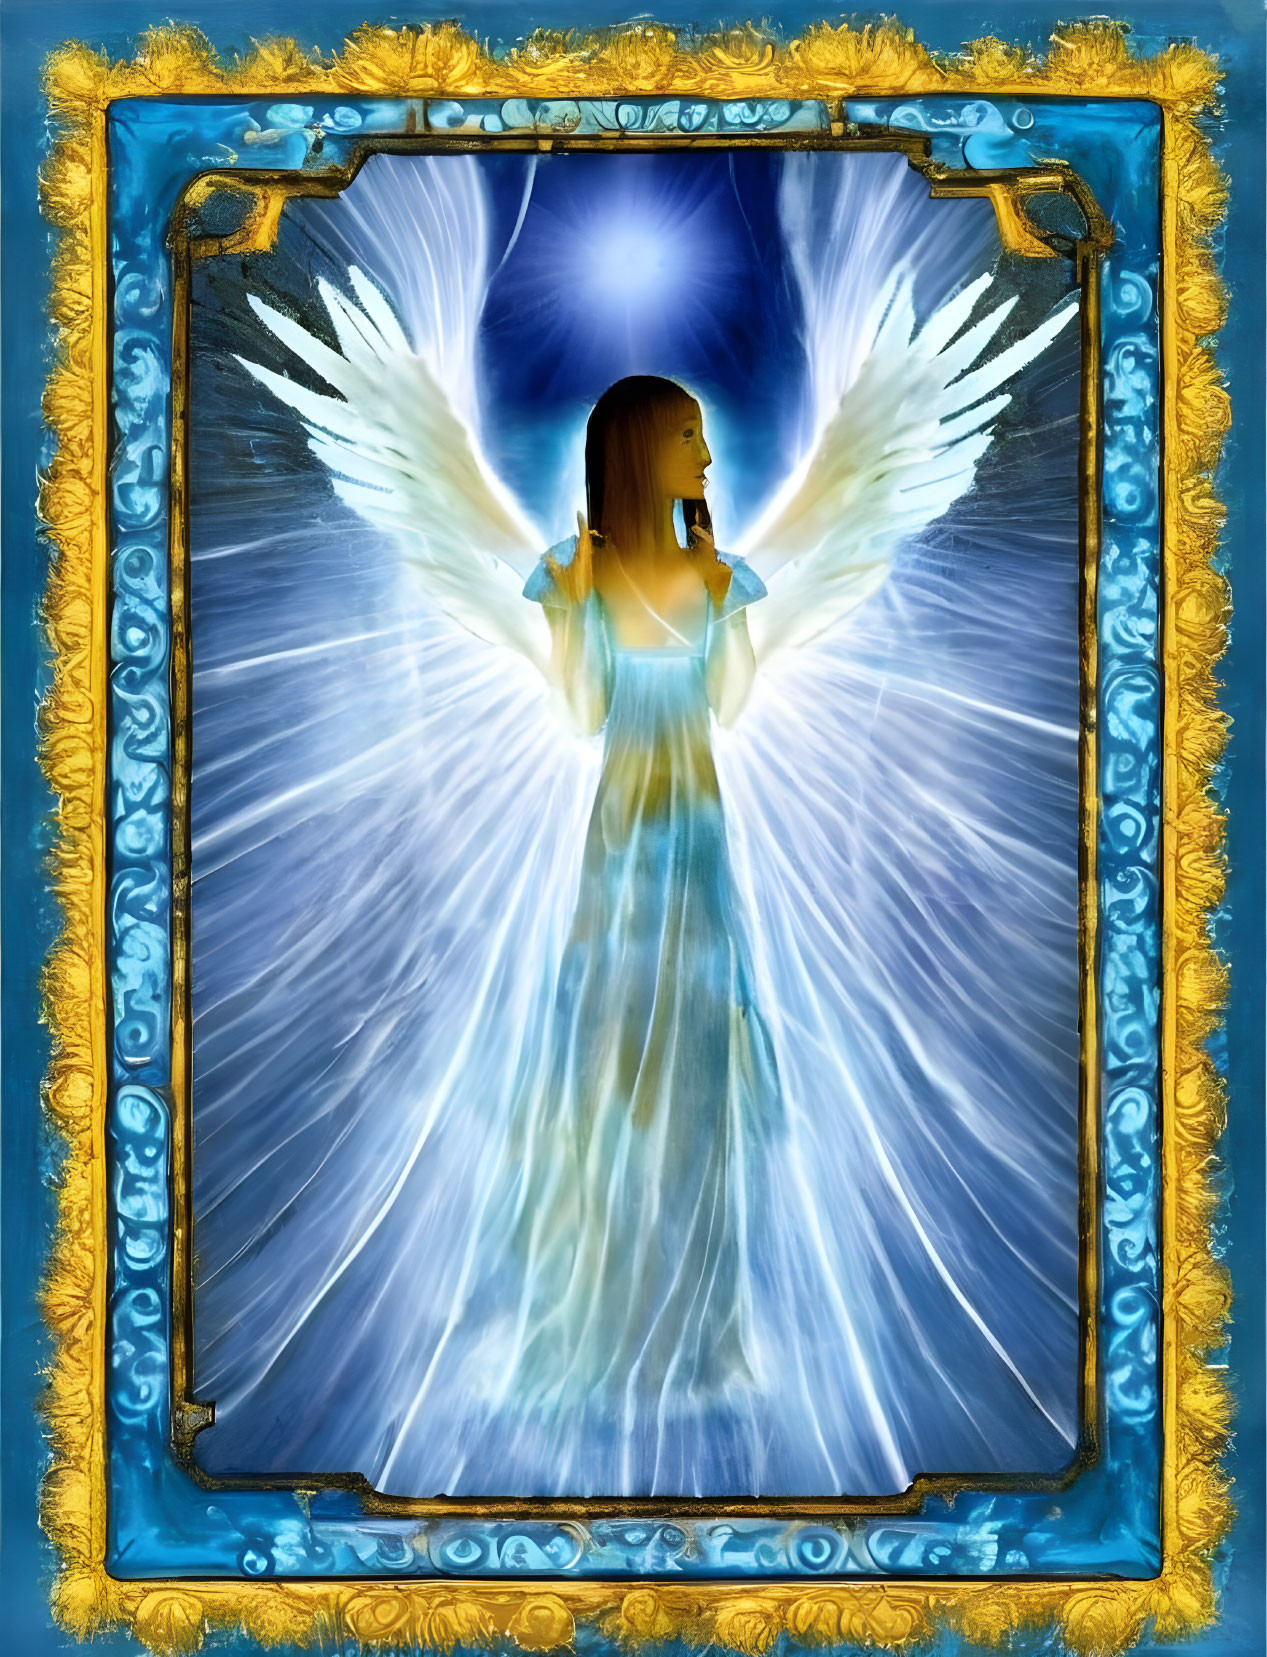 Angel with outstretched wings in ornate blue frame and celestial backdrop